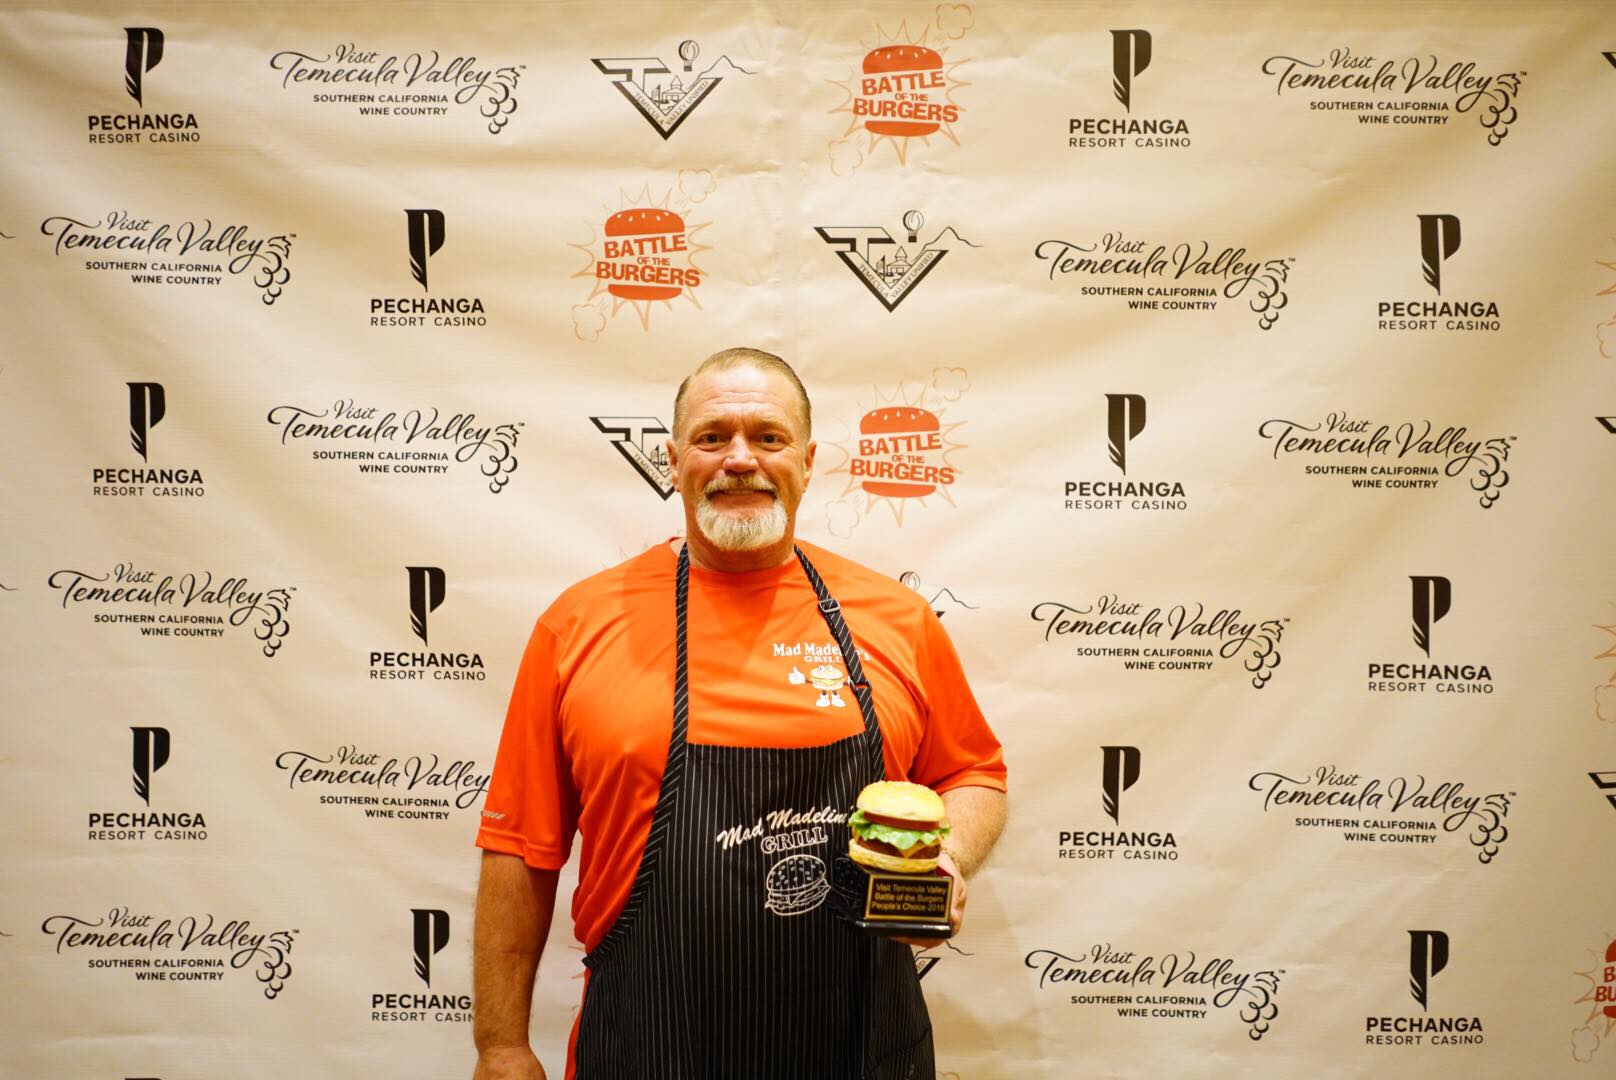 Mad Madeline's Grill won First Place People's Choice